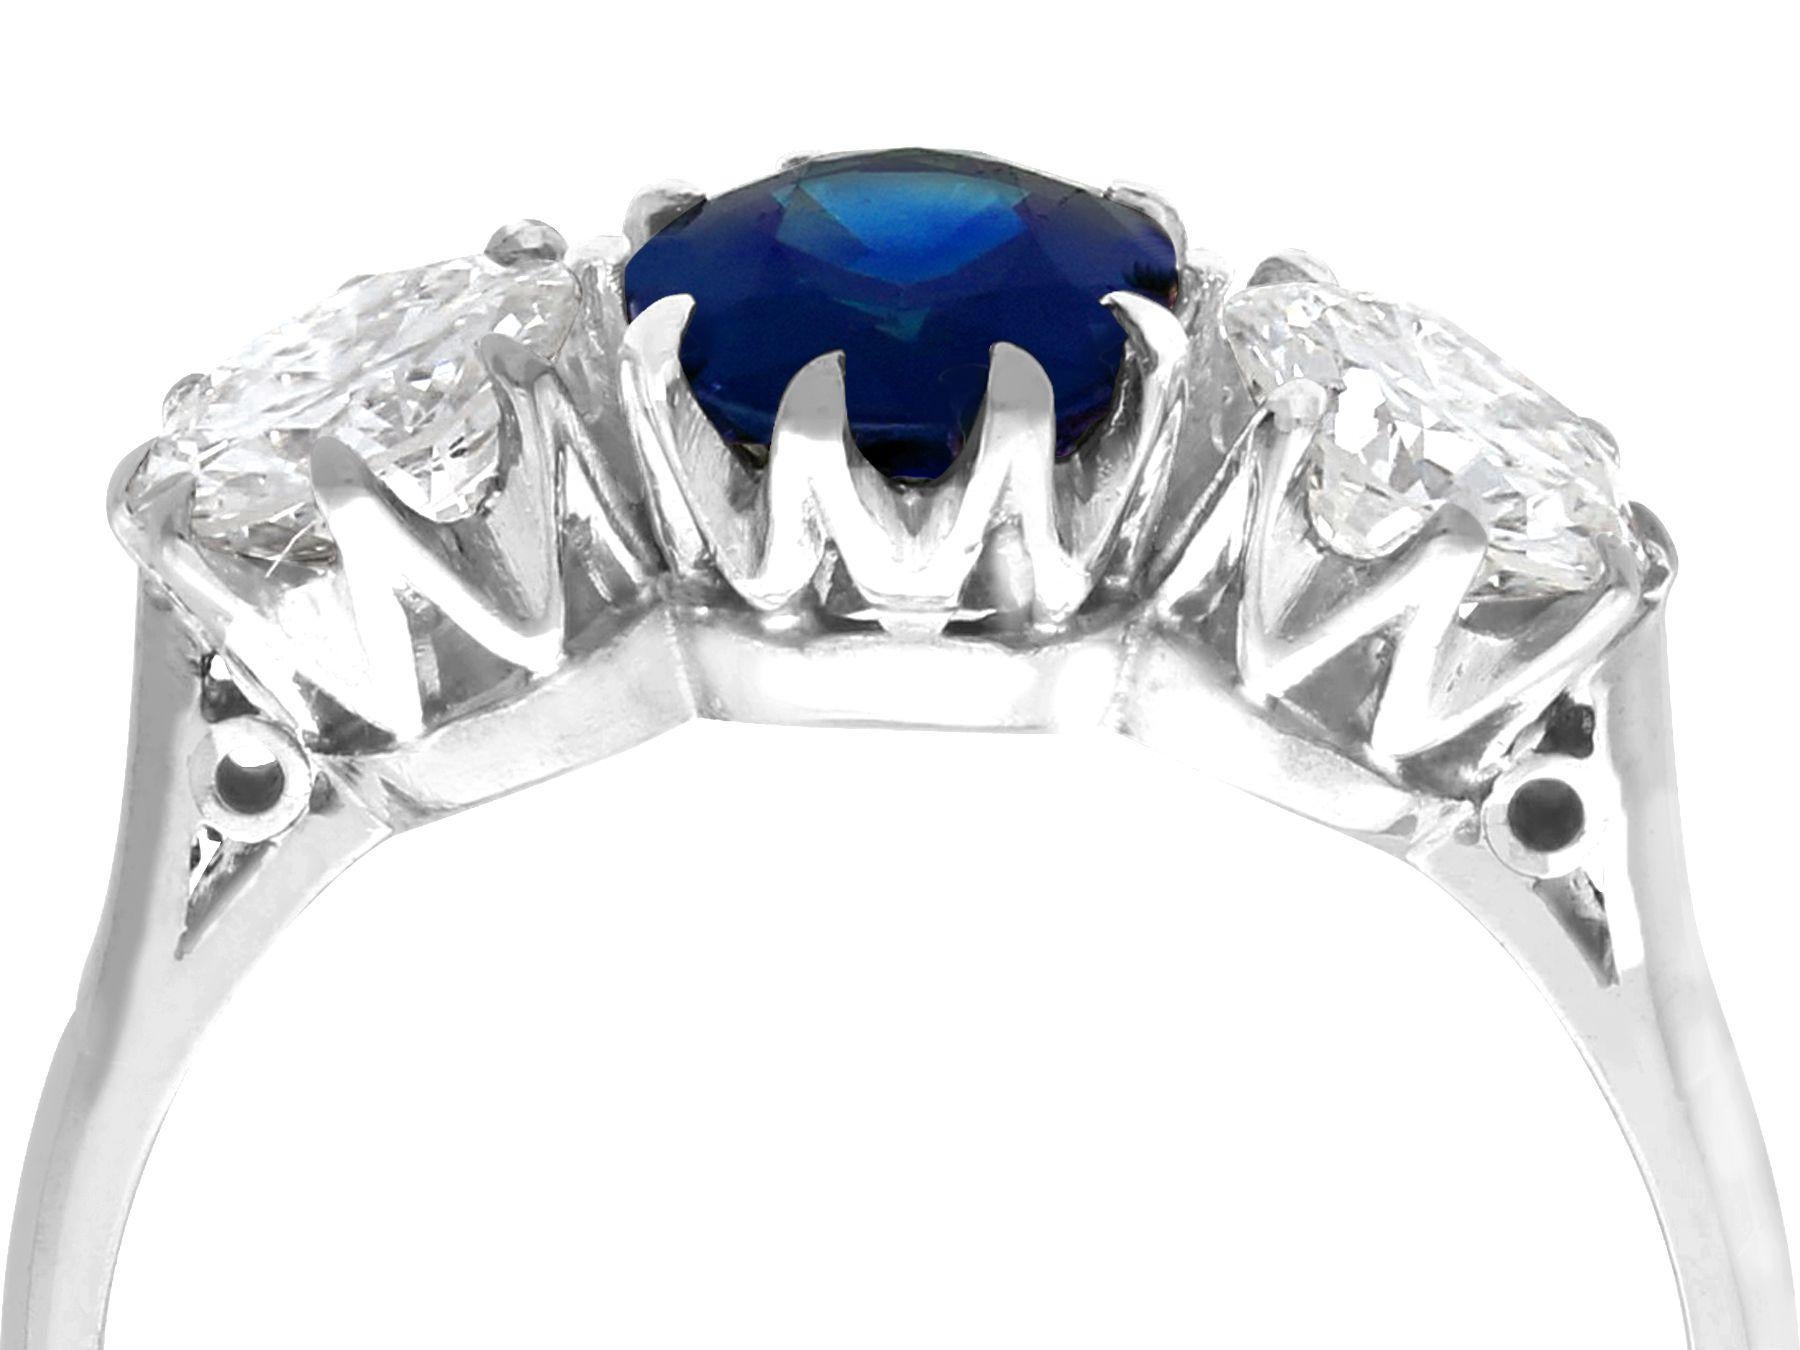 A stunning, fine and impressive antique 1.80 carat sapphire and 1.35 carat diamond, 18 karat white gold trilogy ring; part of our diverse antique jewelry and estate jewelry collections.

This stunning, fine and impressive antique sapphire and